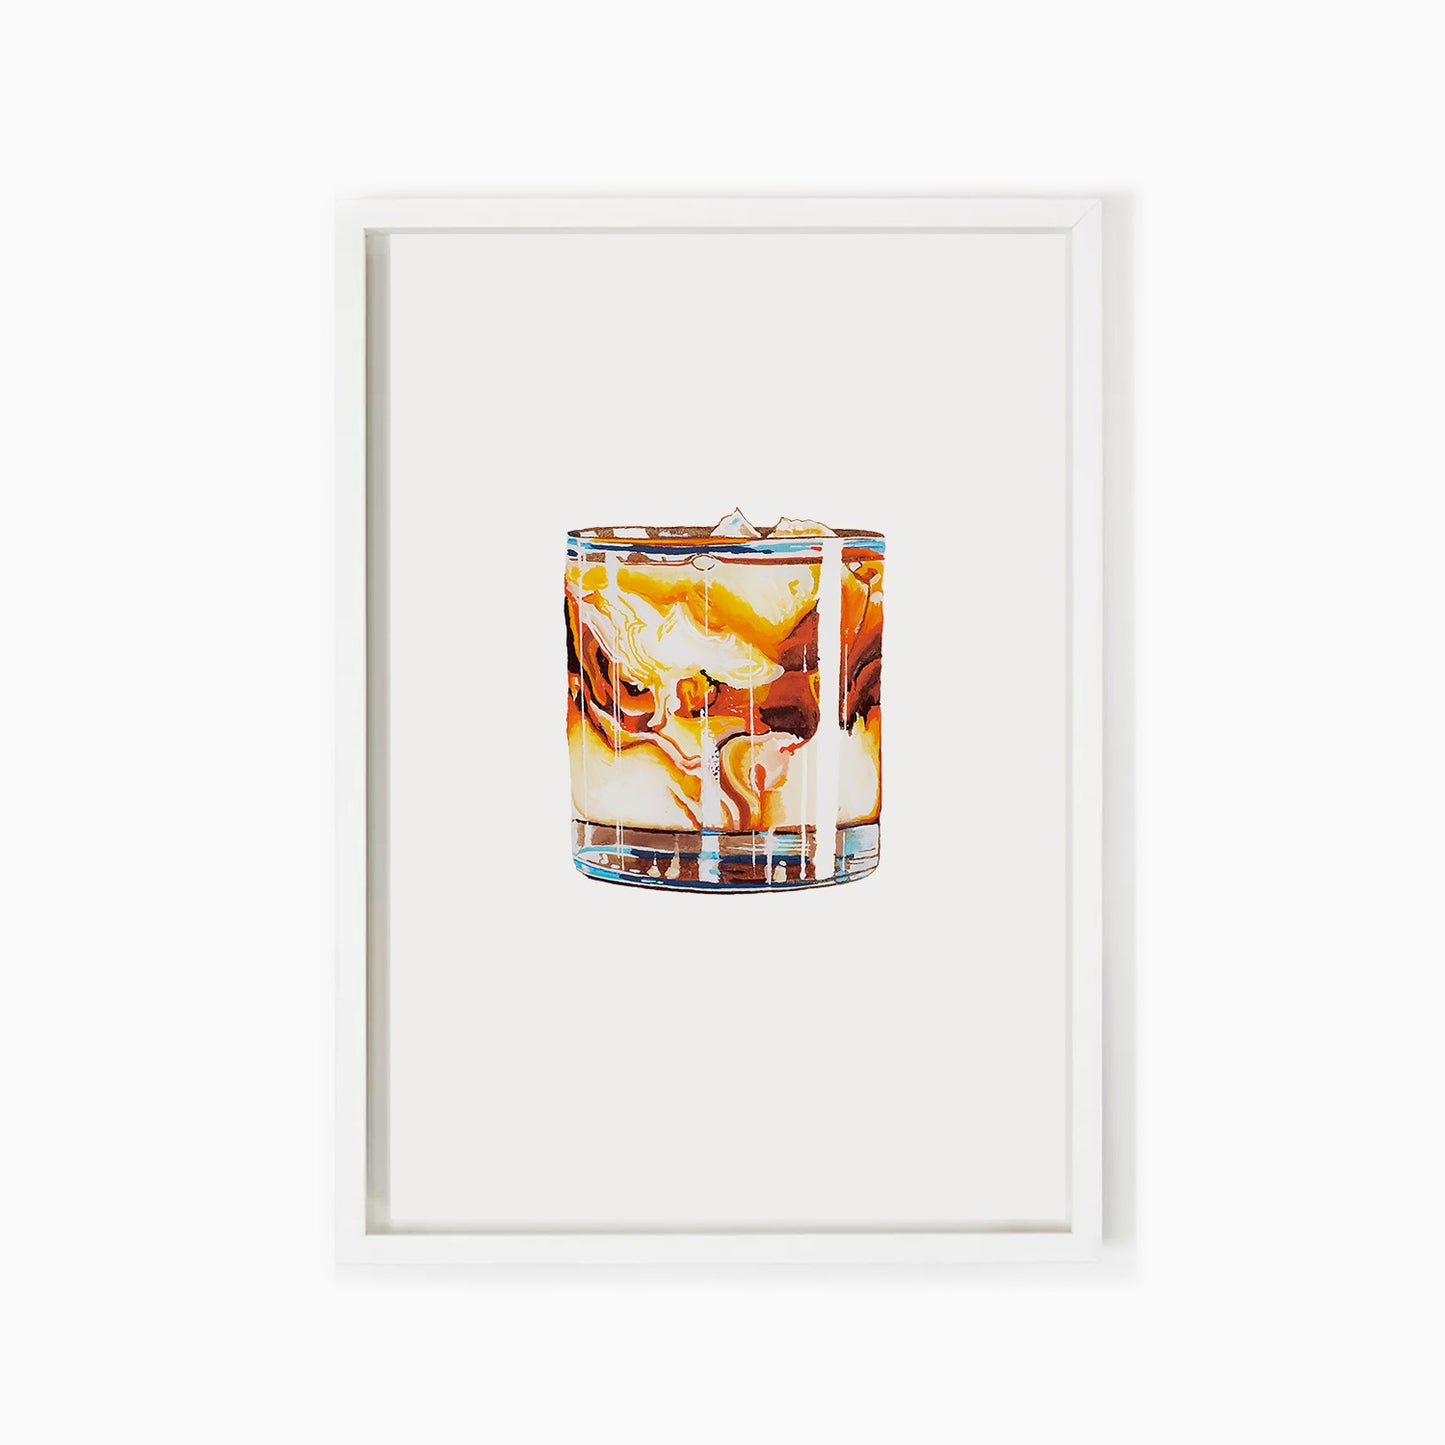 White Russian Cocktail